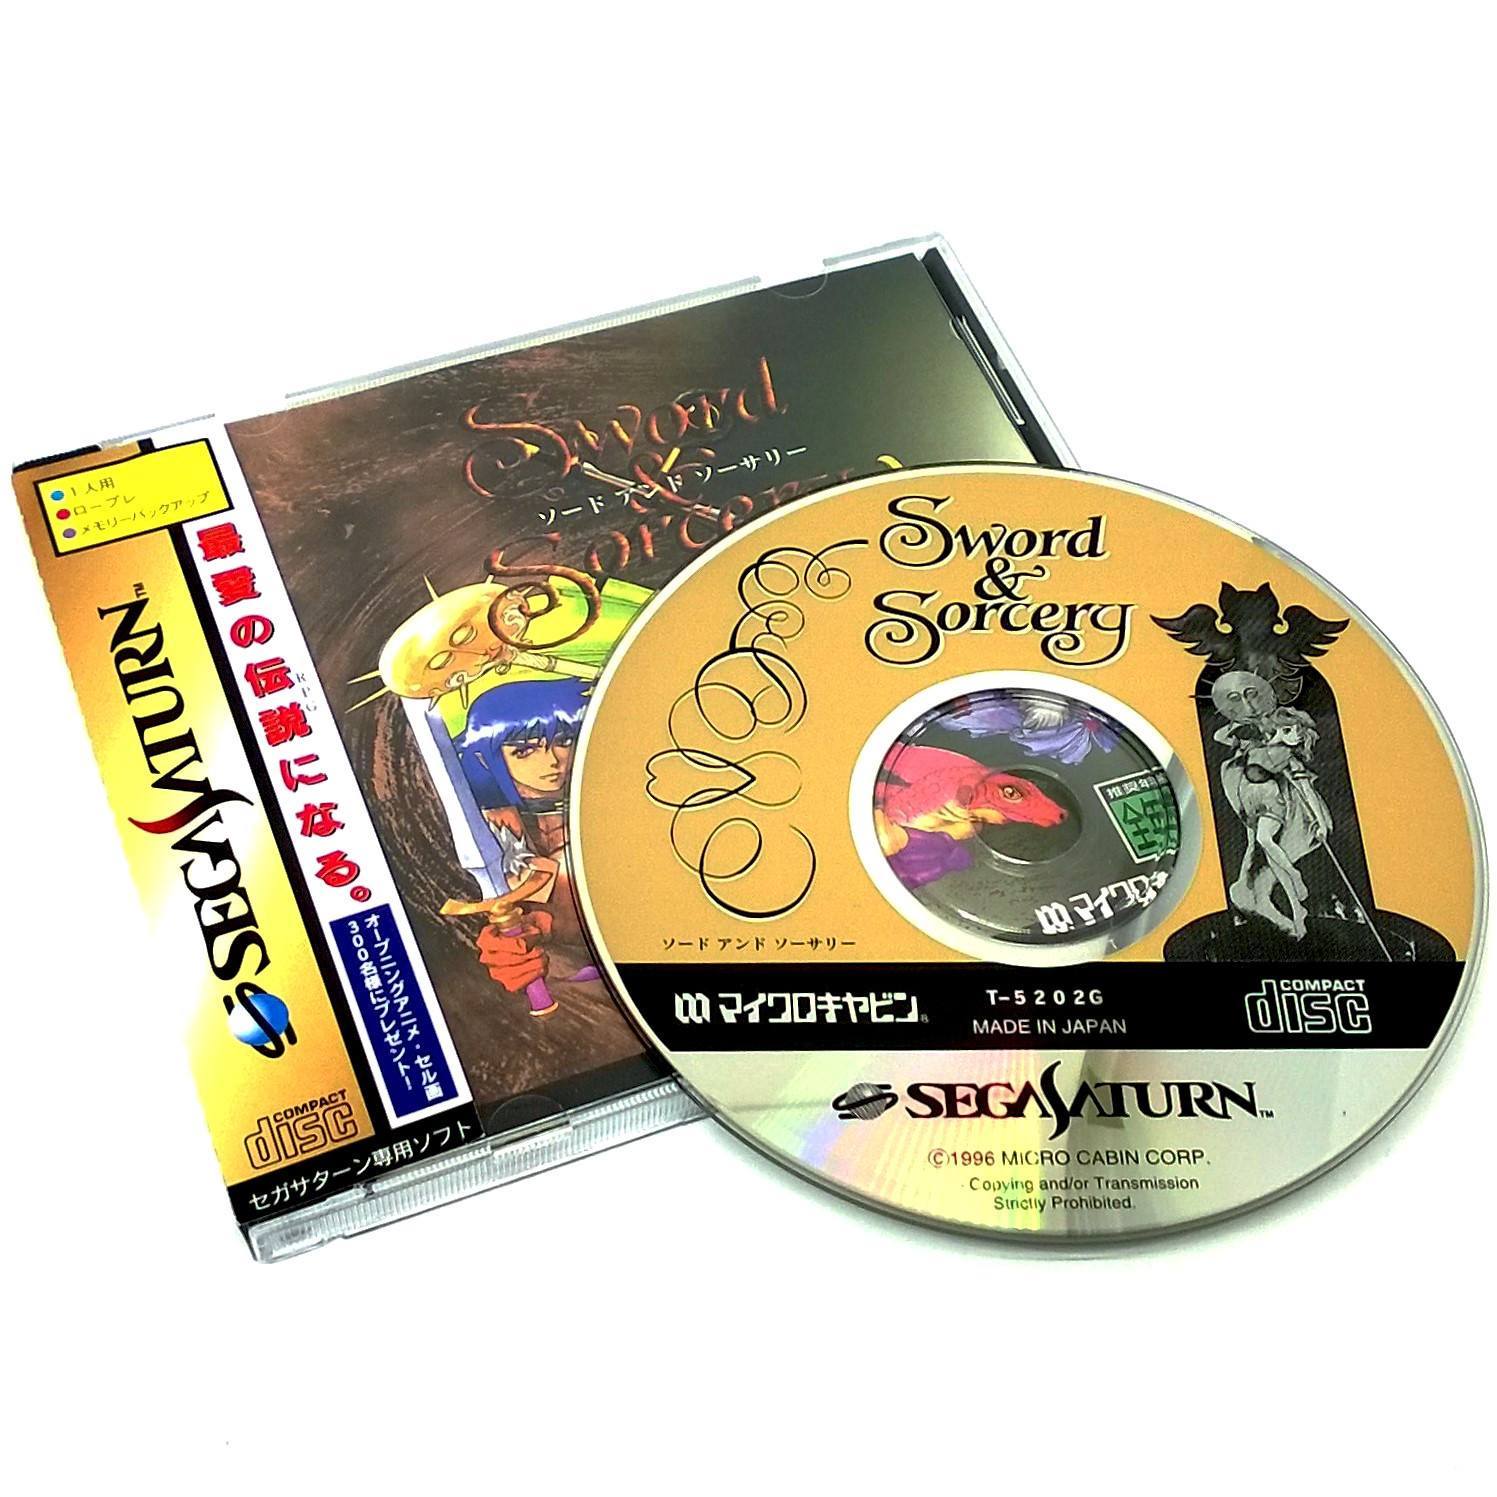 Sword & Sorcery for Saturn (Import)